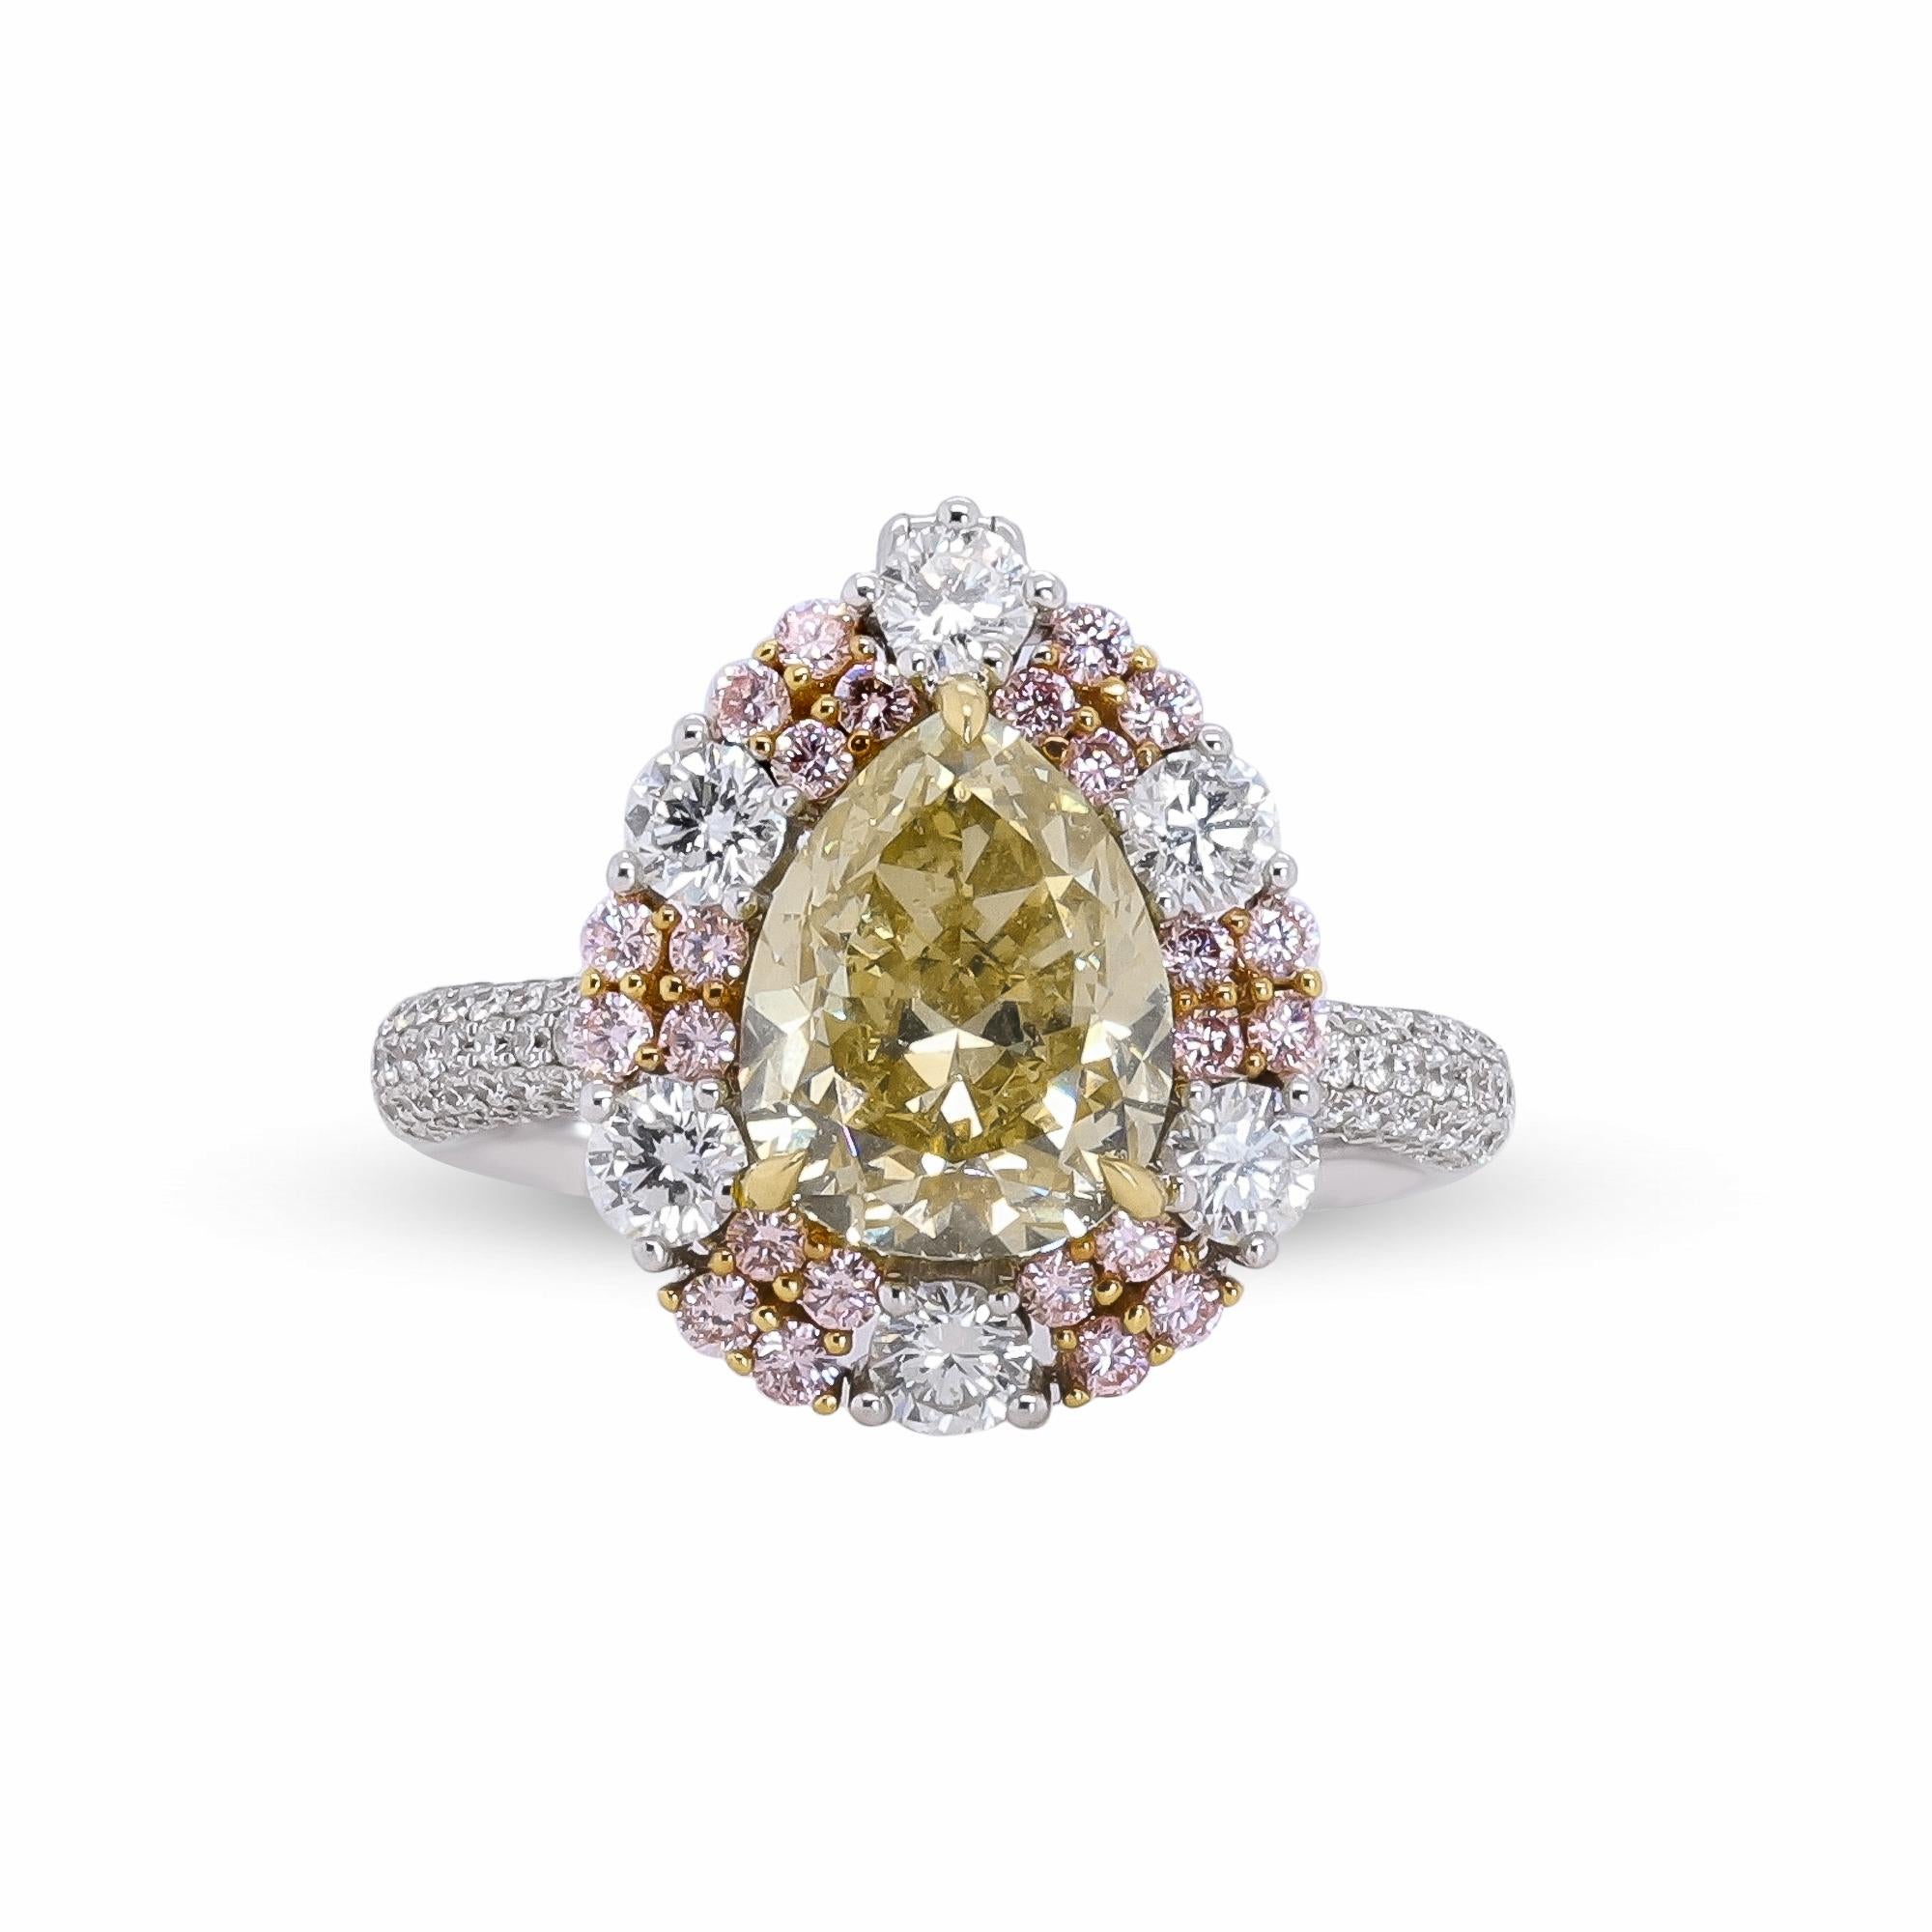 Stunning, timeless and classy eternity Unique Ring. Decorate yourself in luxury with this Gin & Grace Ring. The 18K Two Tone Gold jewelry boasts with Pear shape and fancy-cut 1 pcs 3.16 carat Yellow Diamond, Round-cut 24 pcs 0.35 carat Pink Diamond,